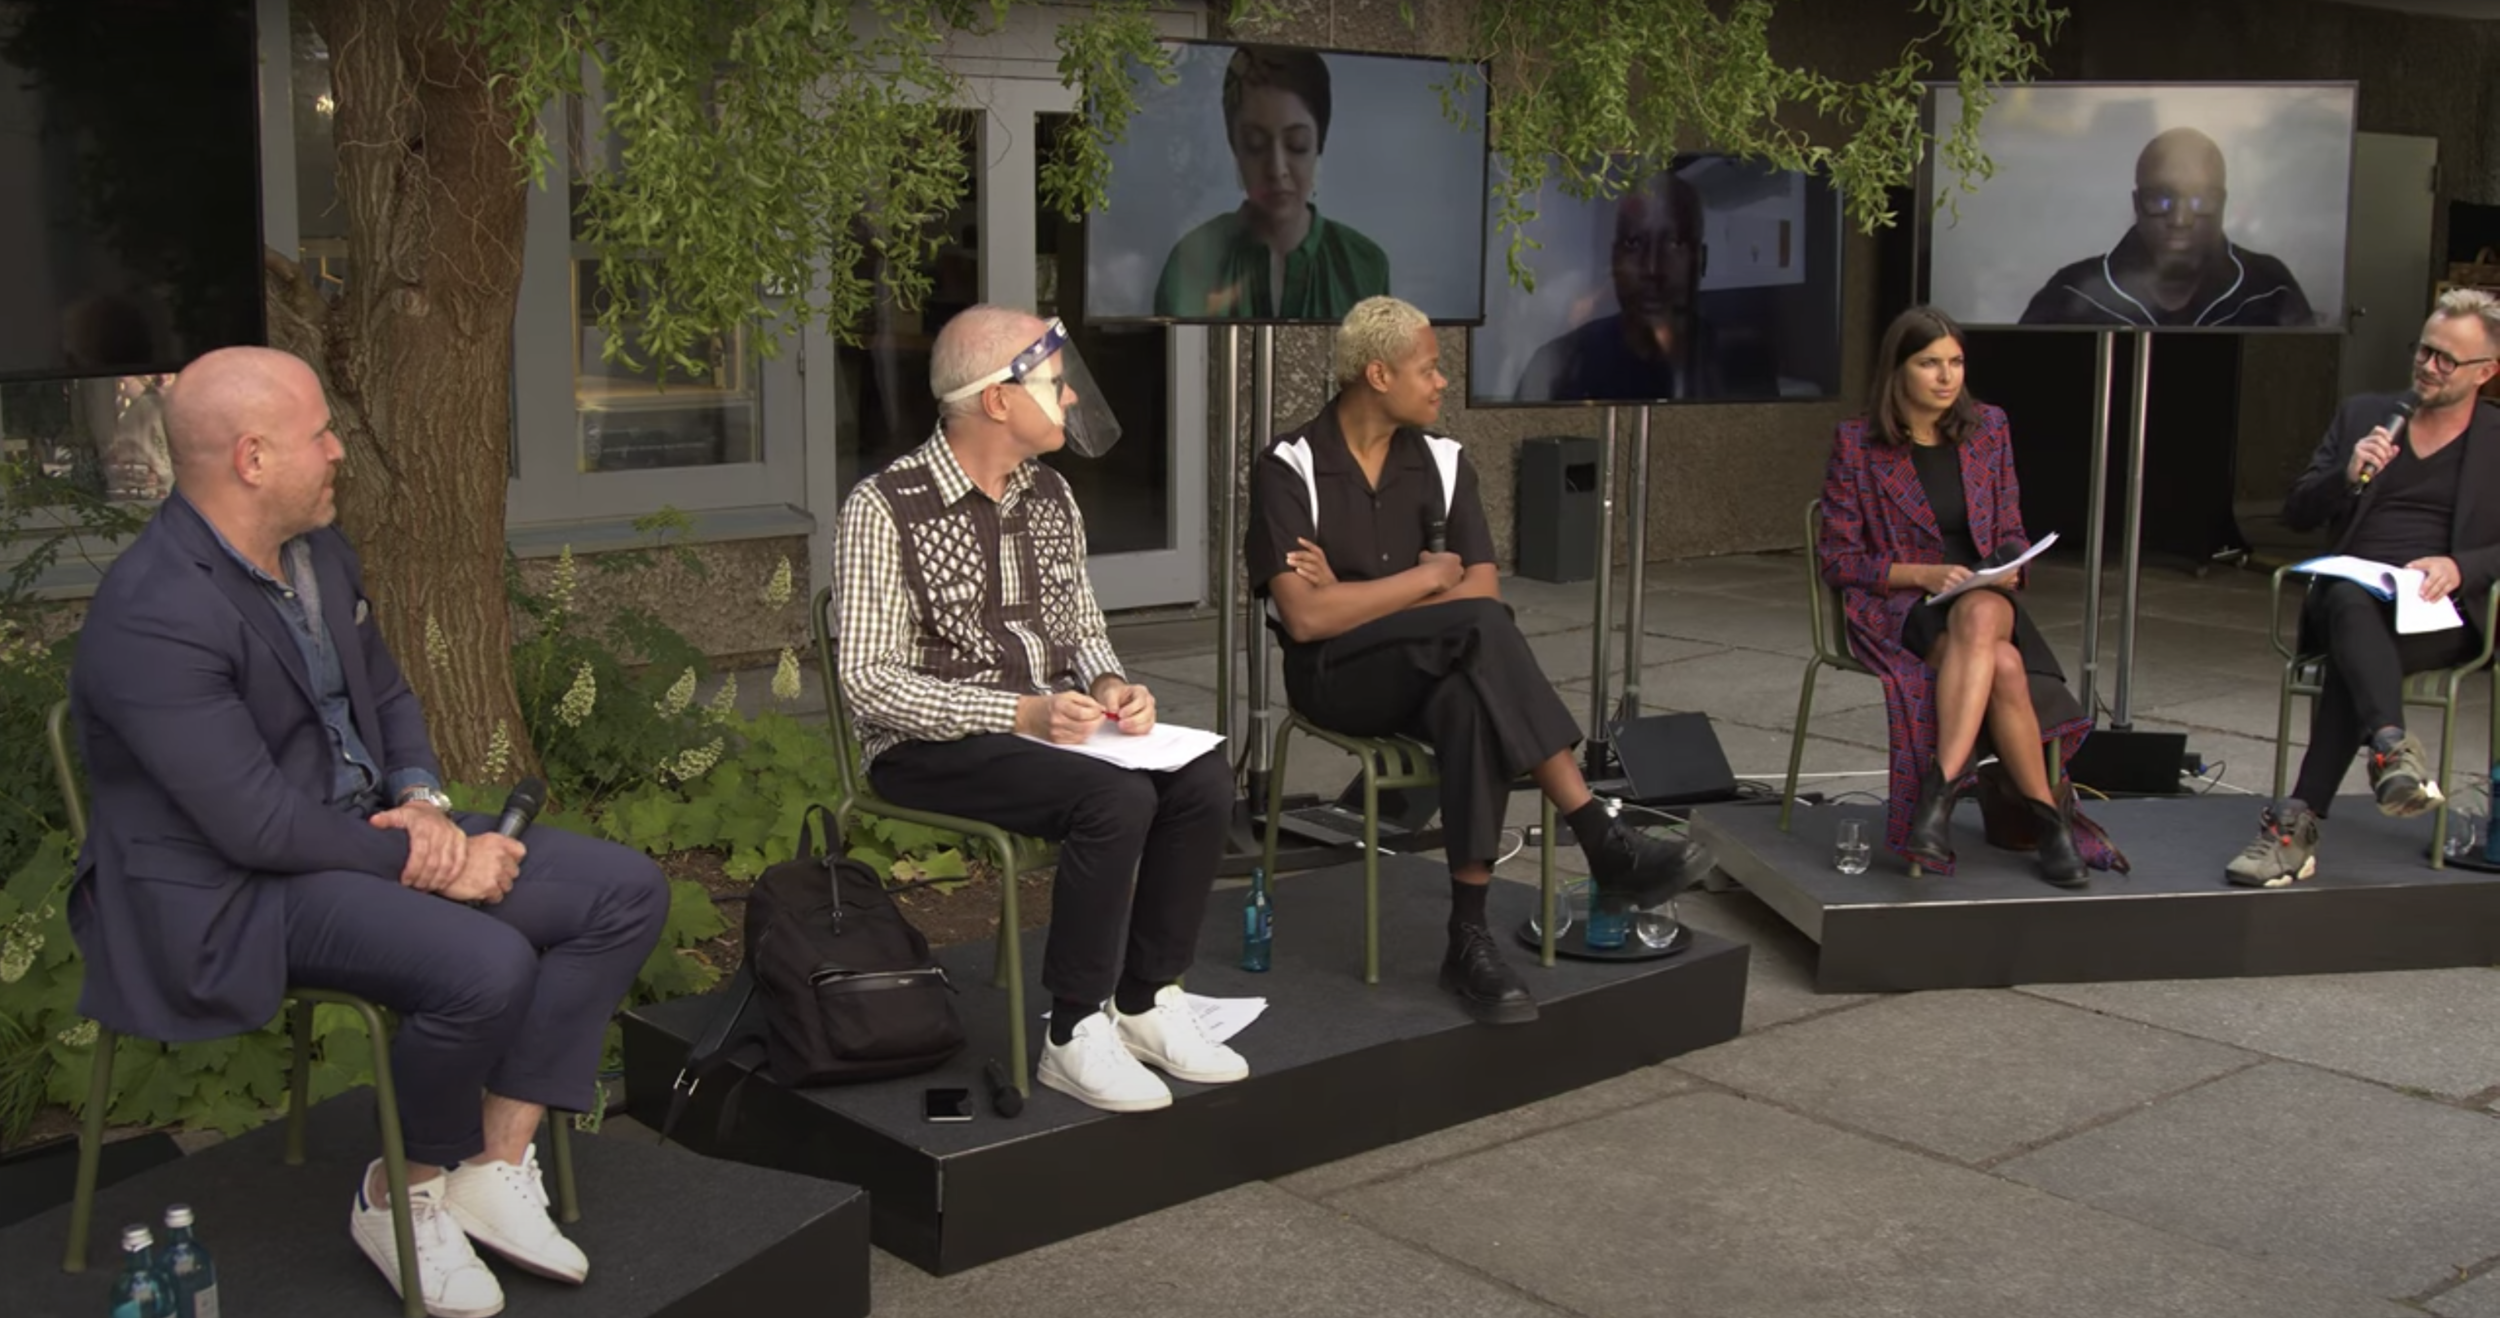 TO WATCHTherme Art Presents Panel Discussion on Bauhaus in a Post-Pandemic WorldWatch the video